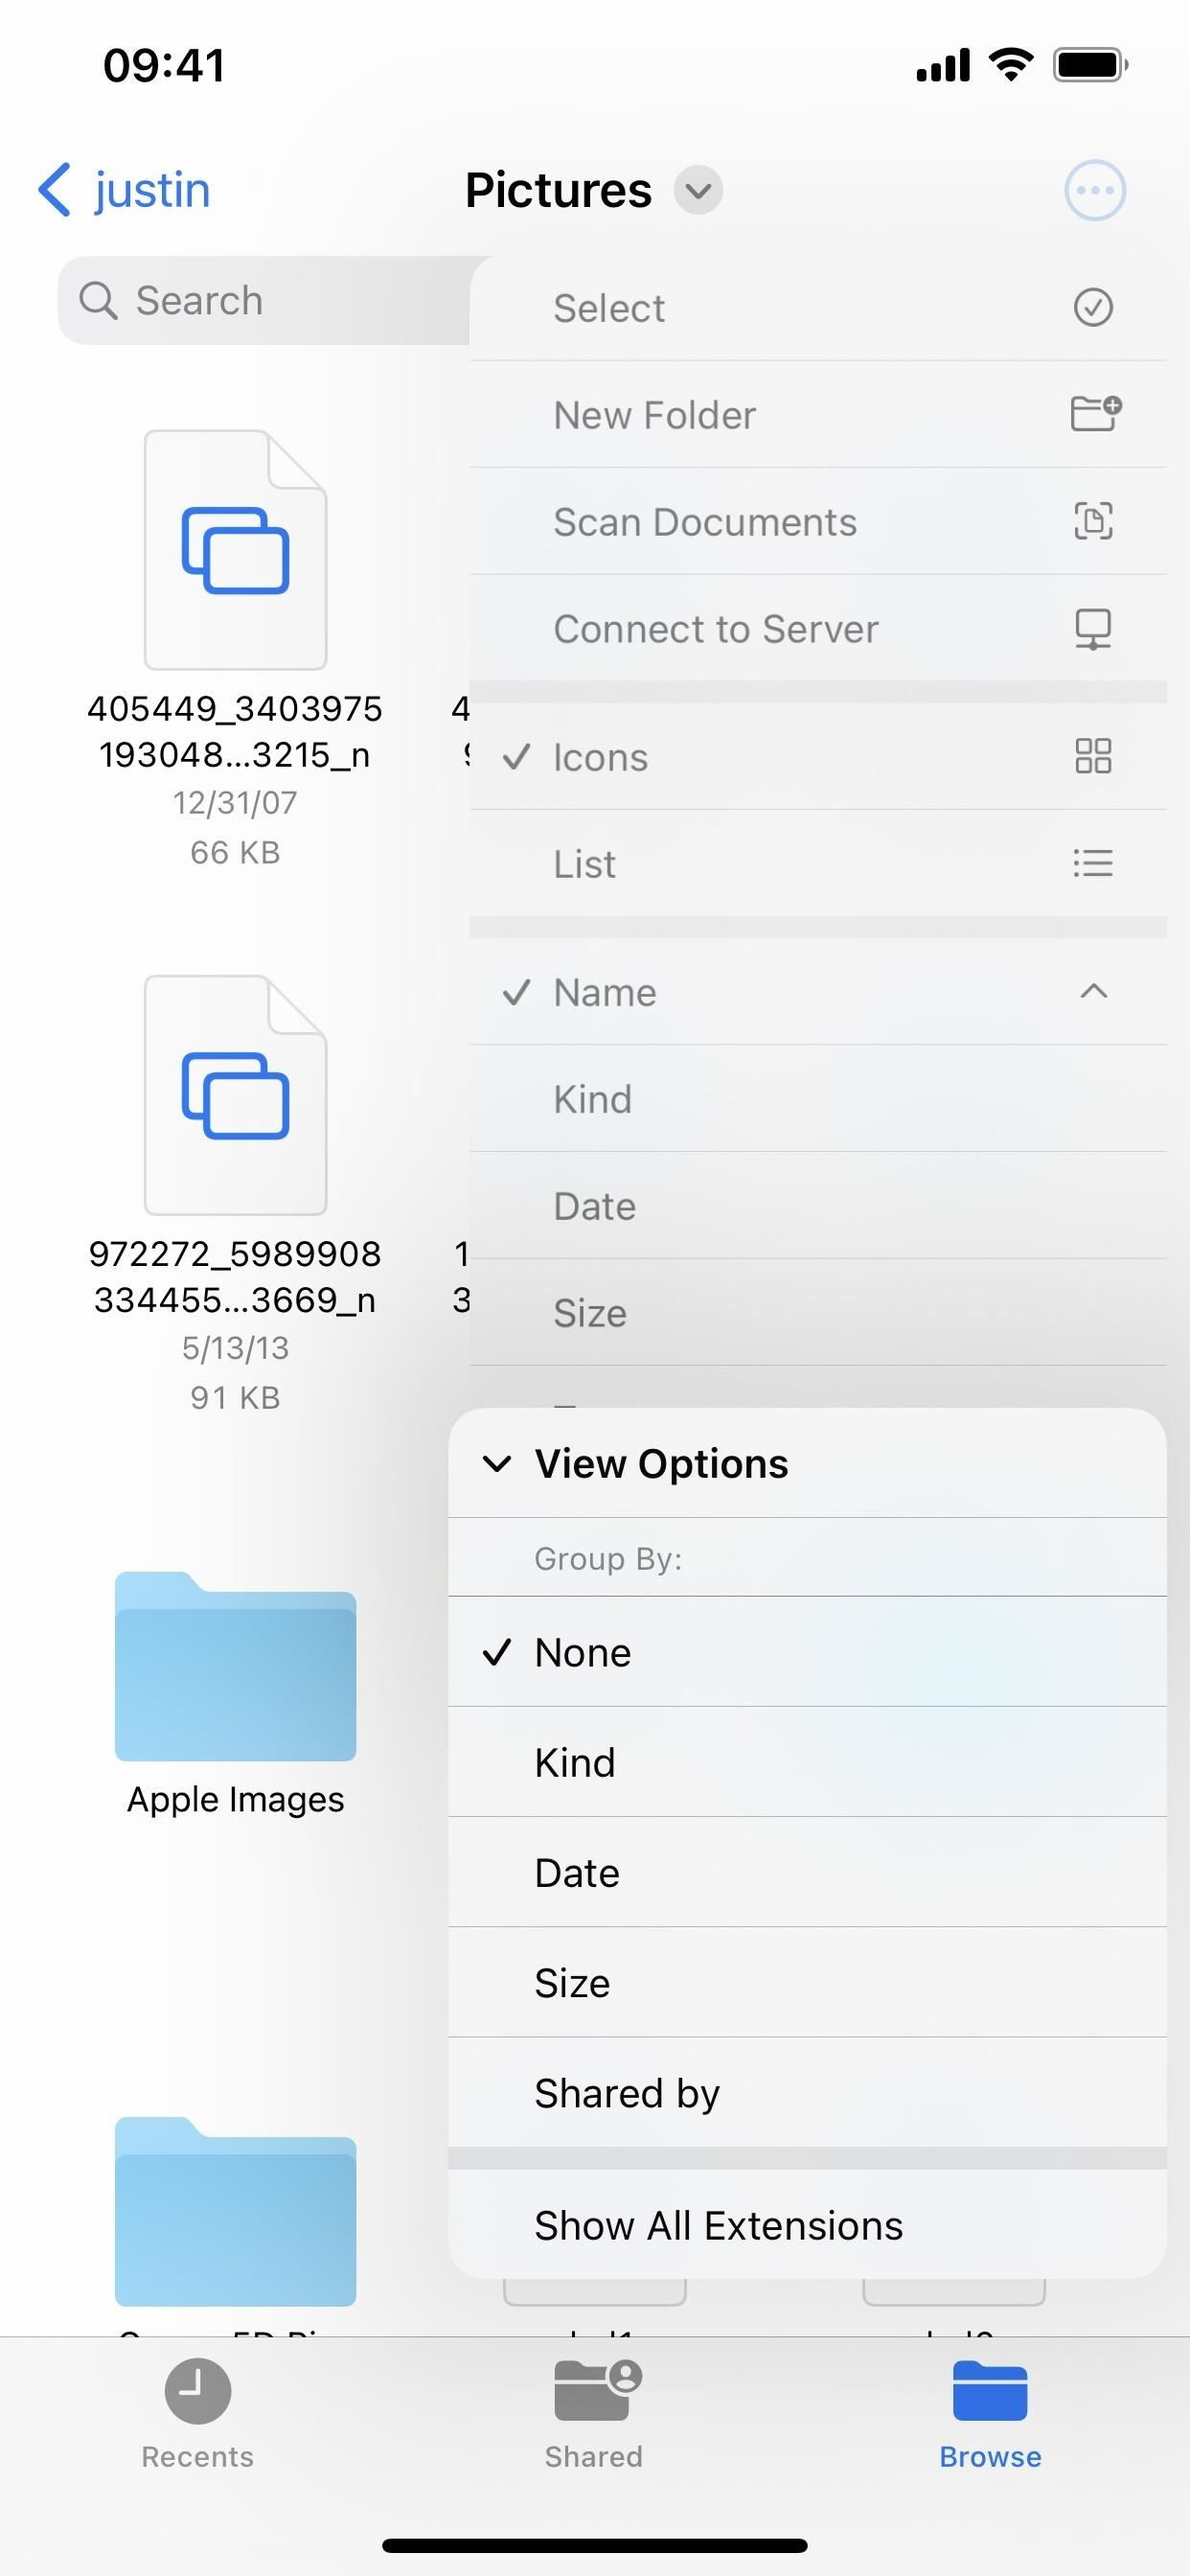 Access All Your Mac's Files Right on Your iPhone or iPad — No Third-Party Software Needed